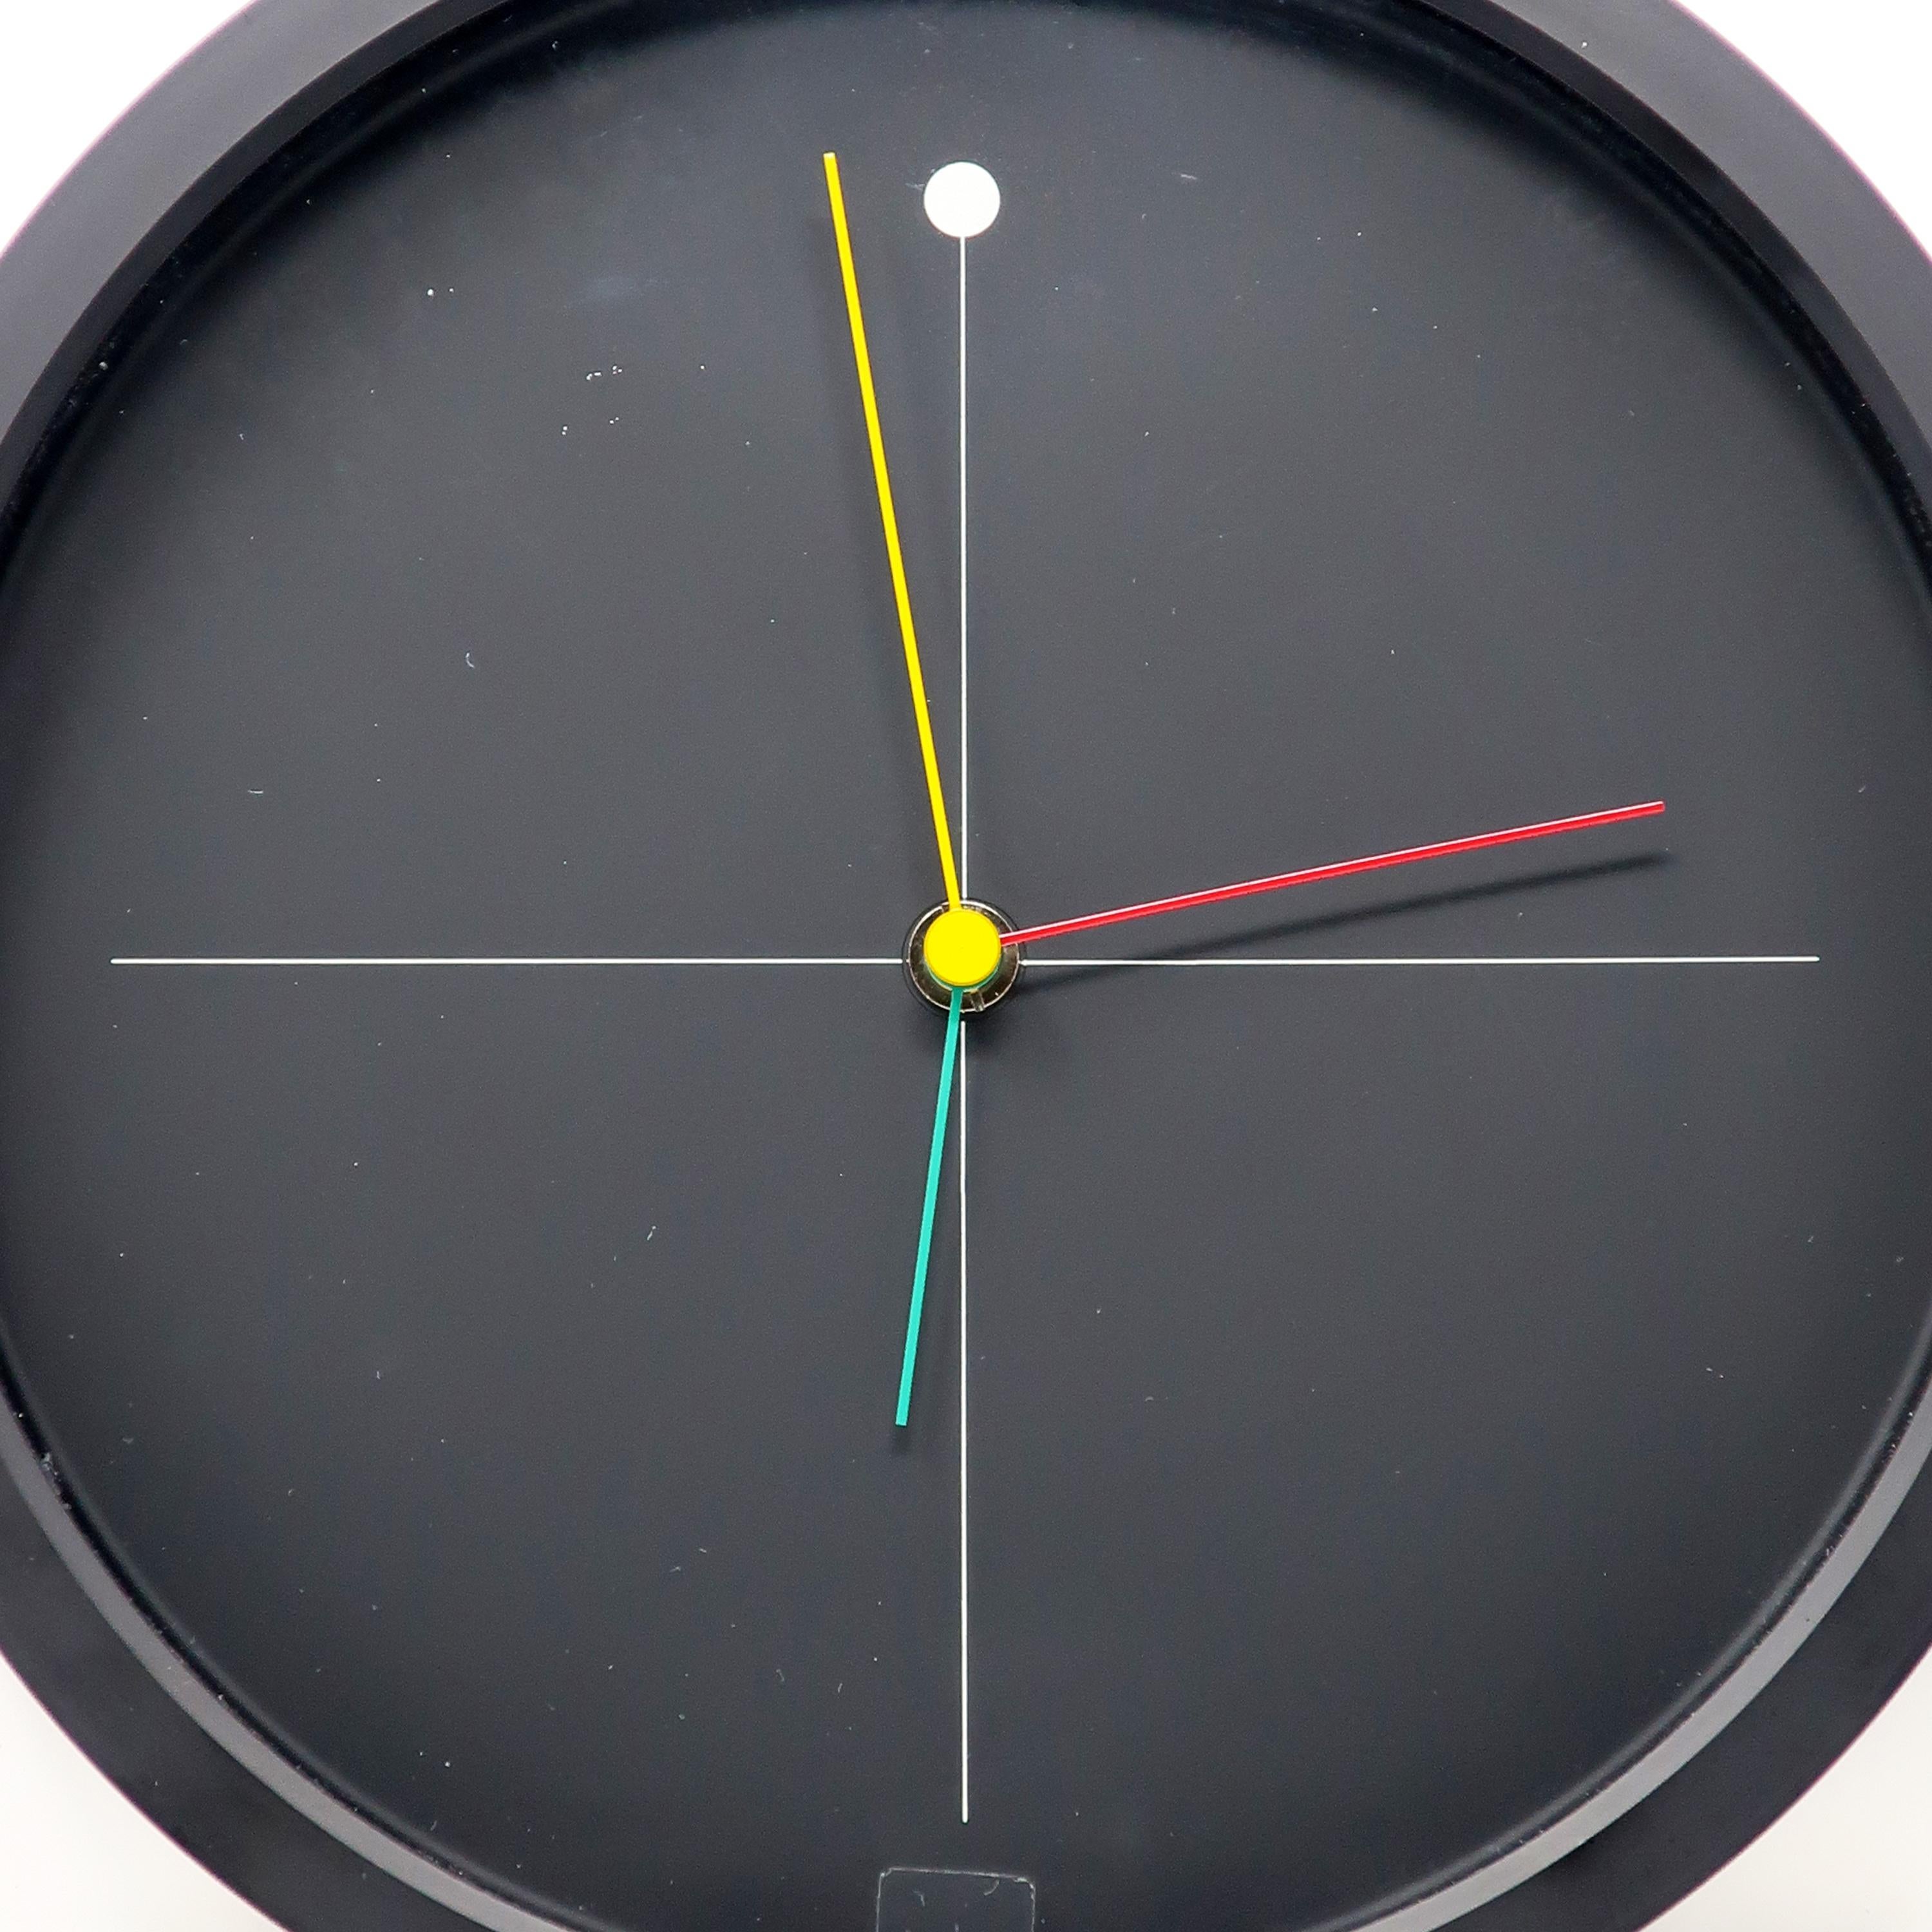 A perfectly elegant and sophisticated 1980s wall clock designed by Shohei Mihara for Wakita. Postmodern, Memphis-influenced design at its finest! Black with white, red, green, and yellow accents. Battery operated and works great.

In very good